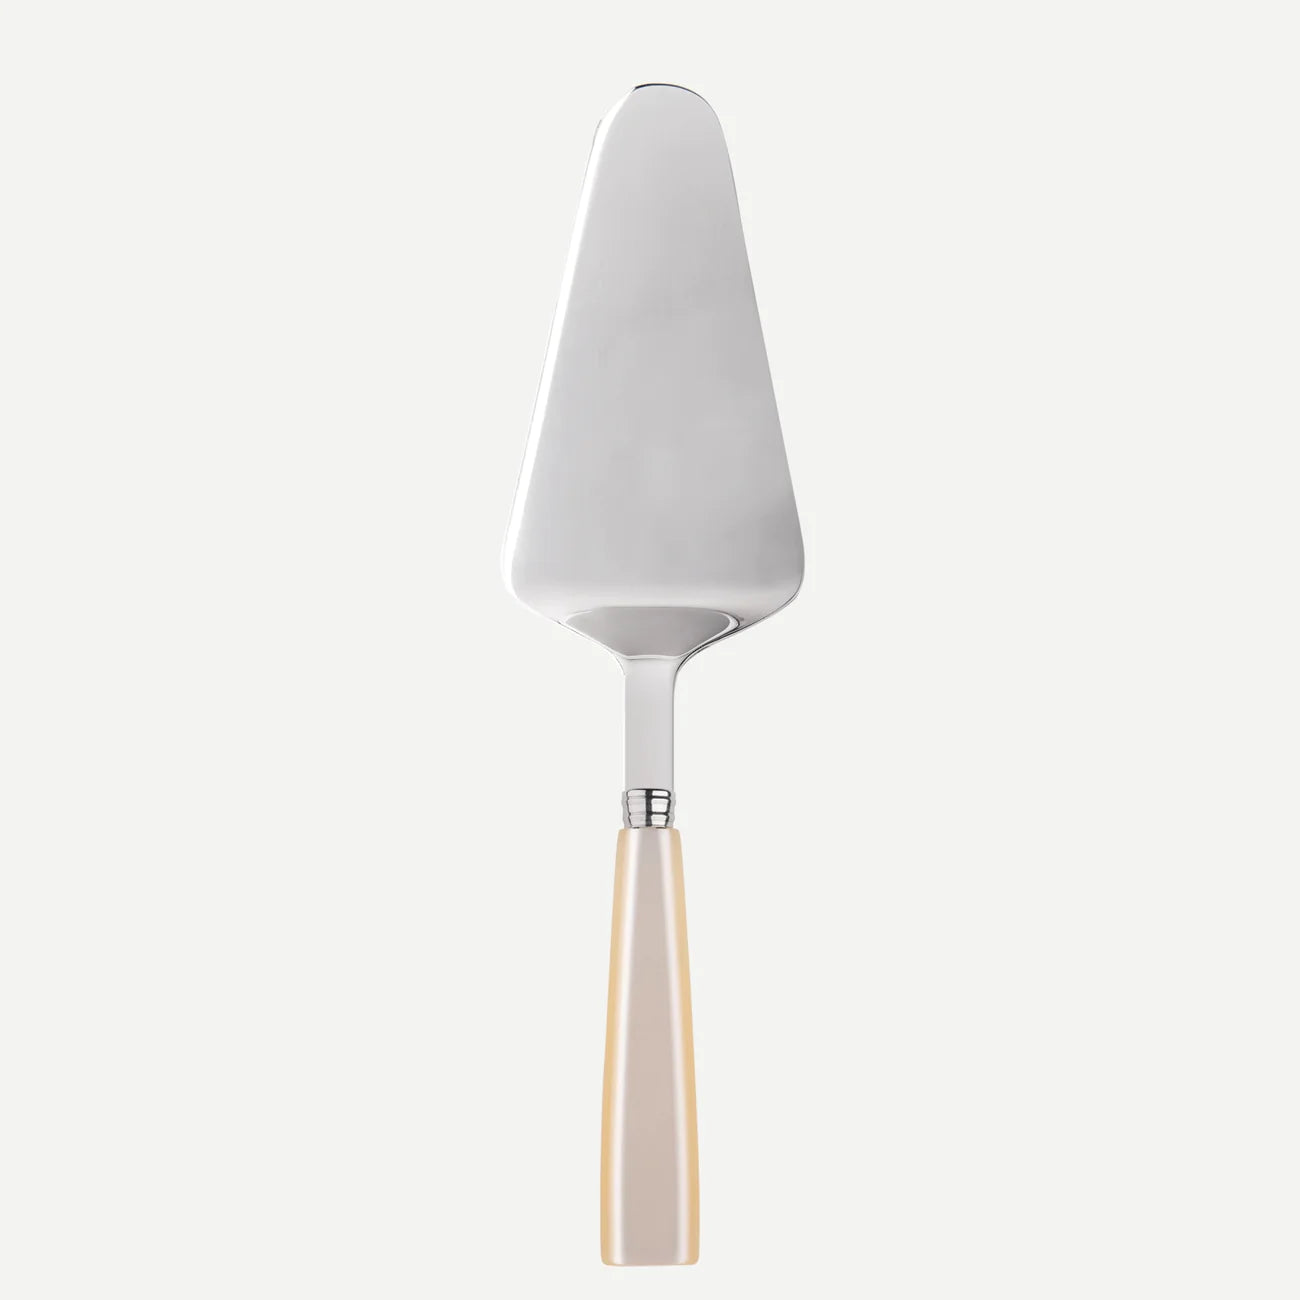 A sabre Paris tart slicer with a natural pearl coloured handle. 